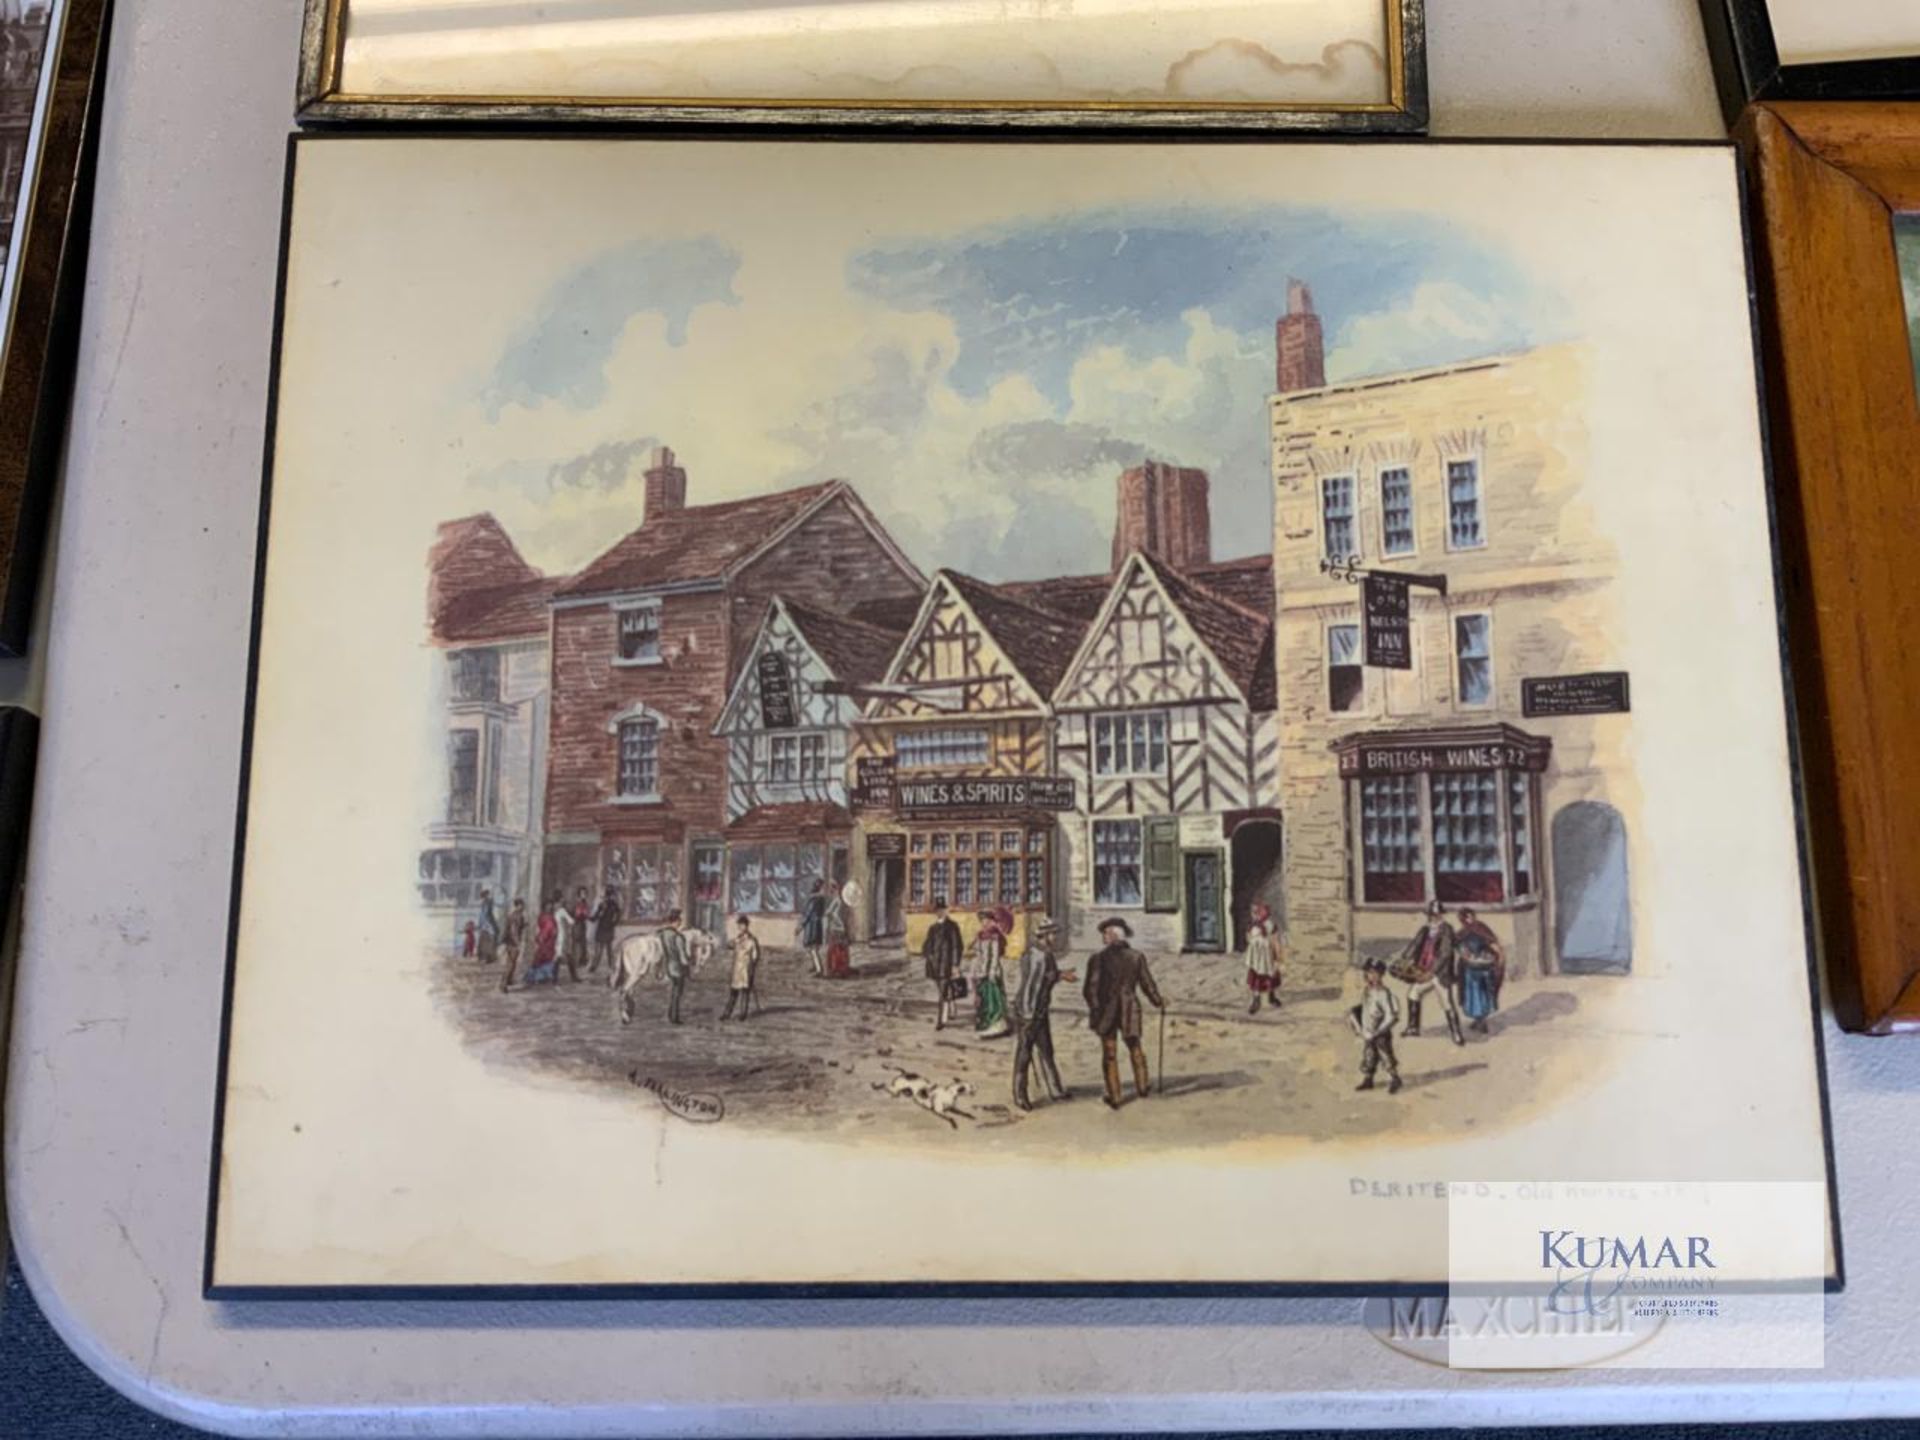 23: Various Pictures, Paintings, Drawings Etc - As Shown Many Historic Images of Birmingham by James - Image 2 of 26